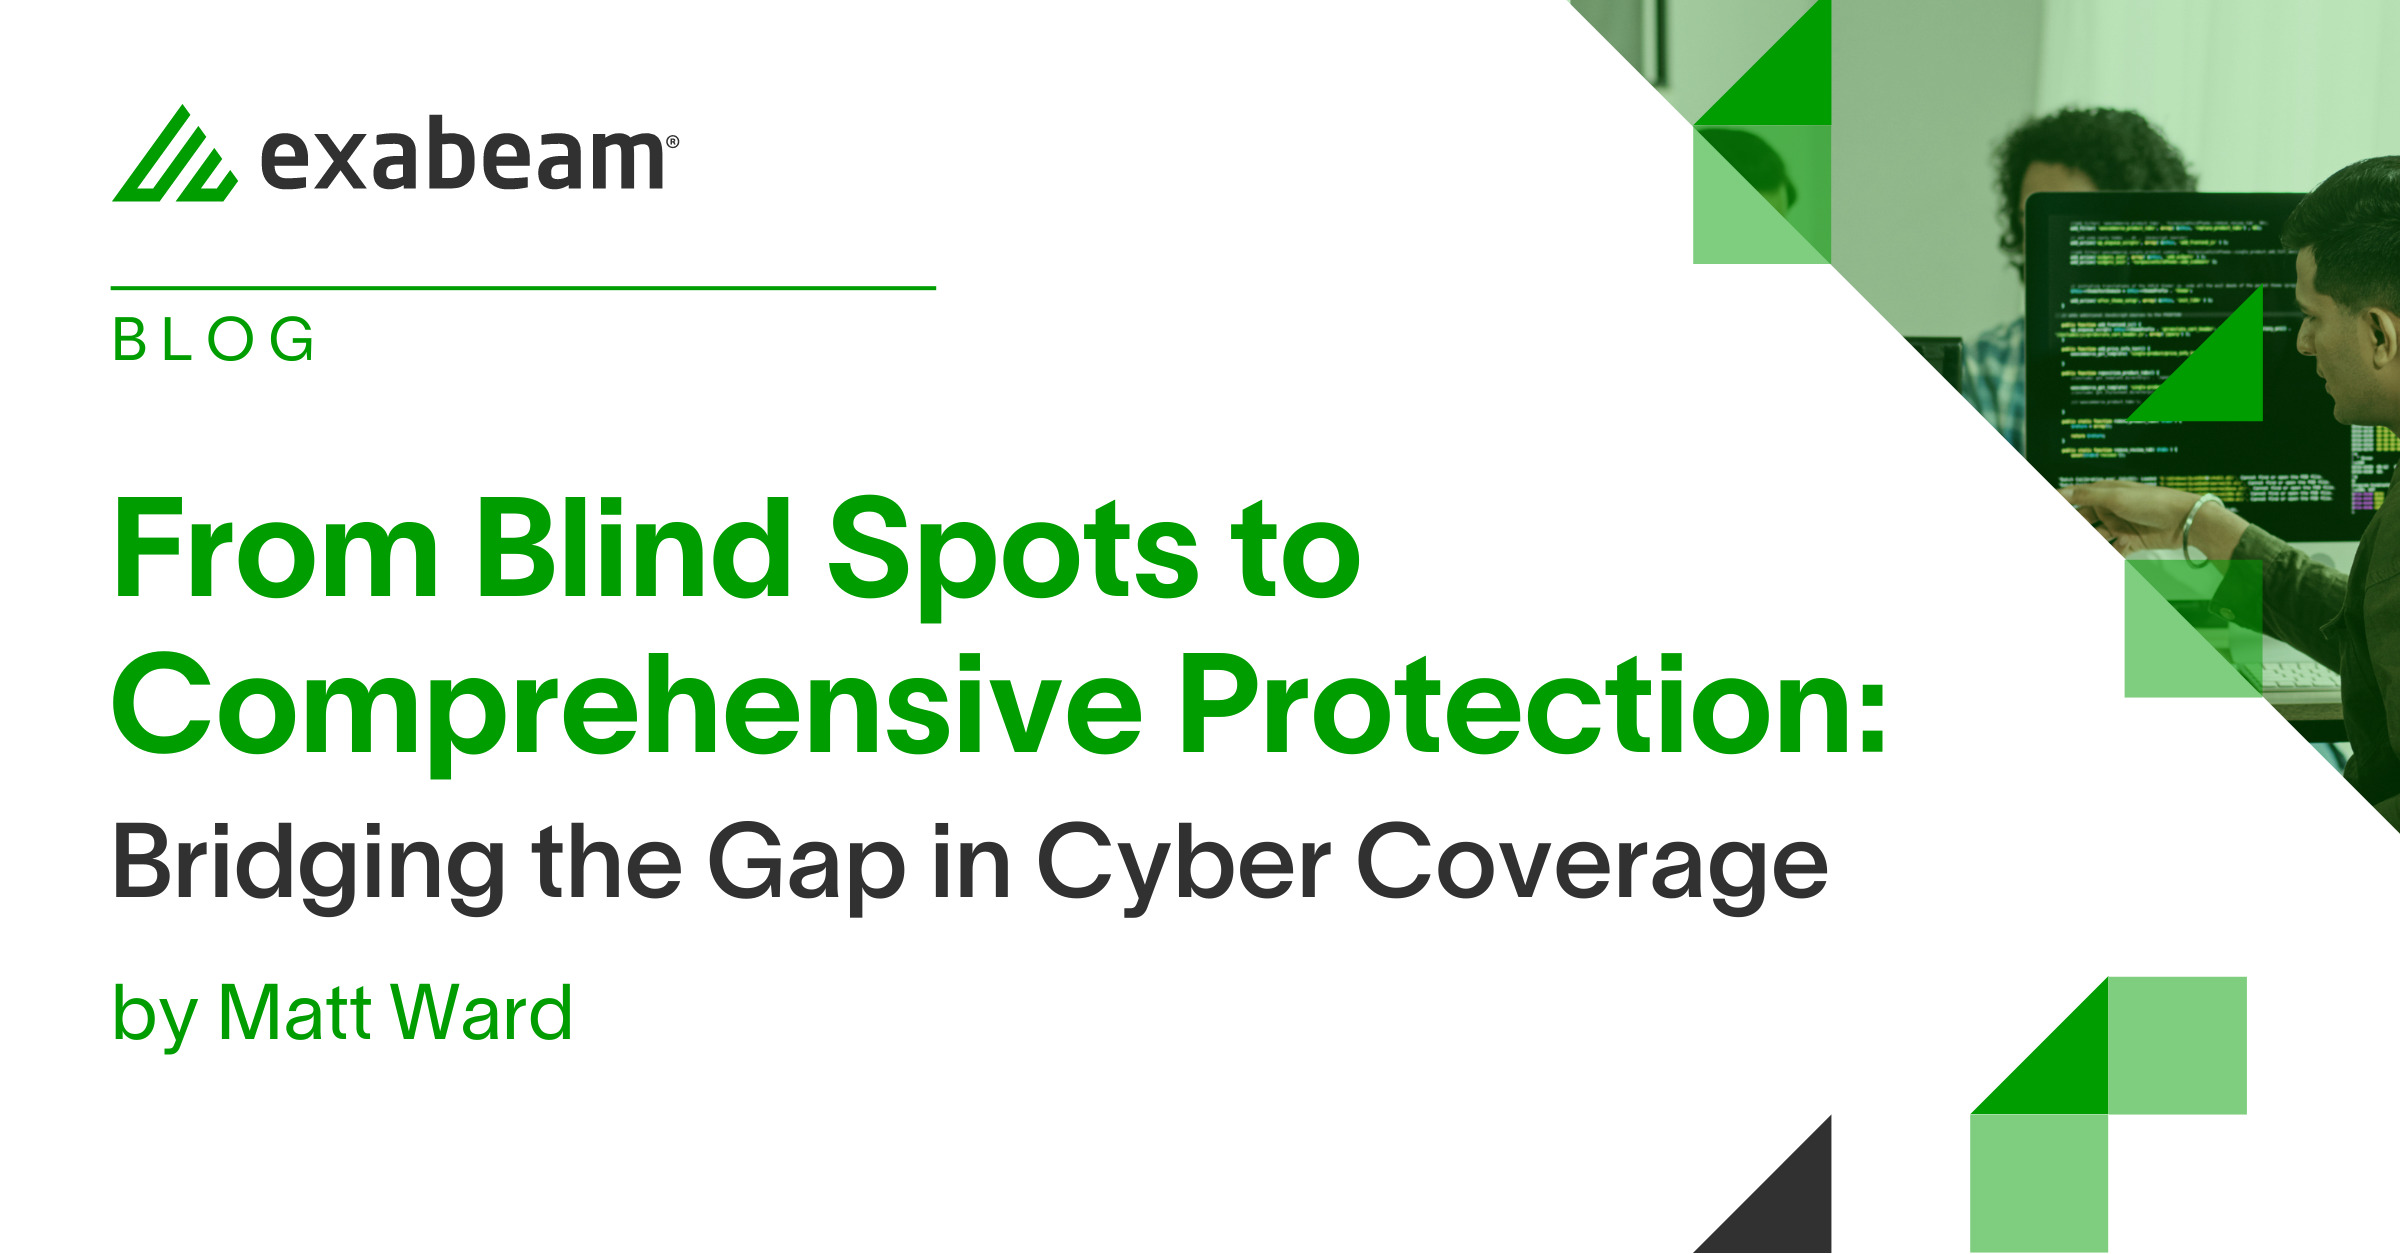 From Blind Spots to Comprehensive Protection: Bridging the Gap in Cyber Coverage